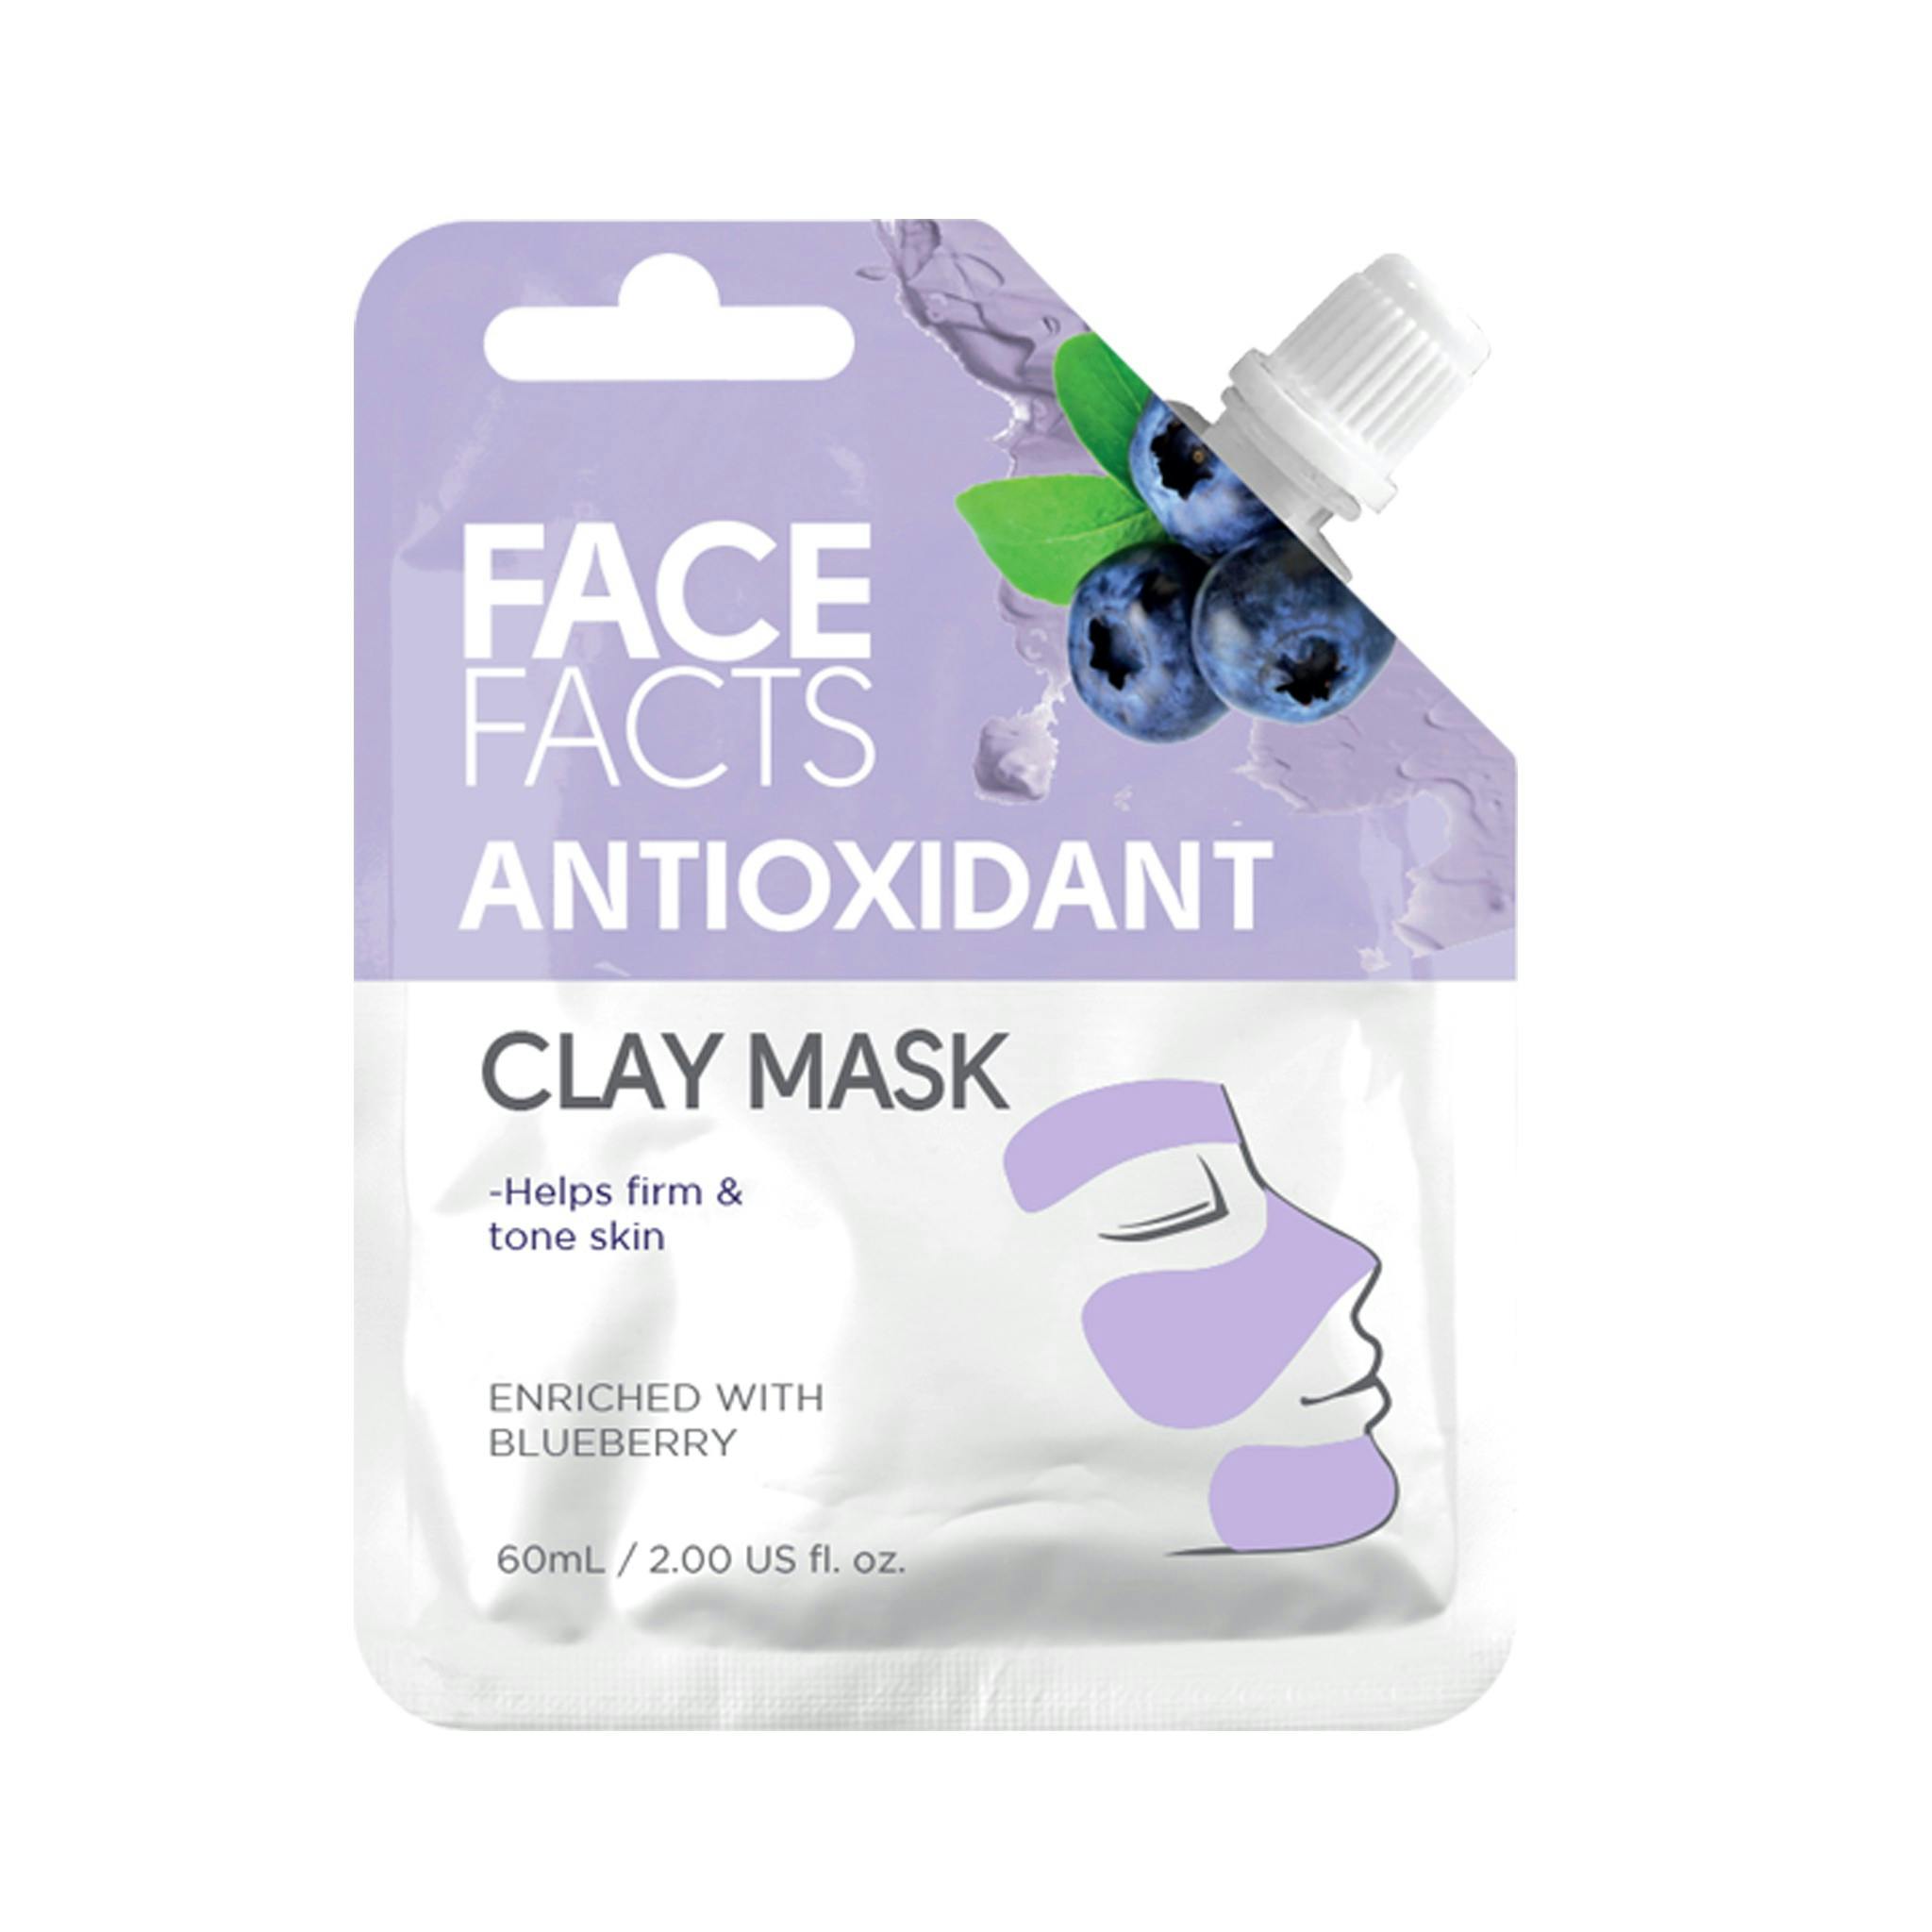 Face Facts Antioxidant Clay Mask 60 ml